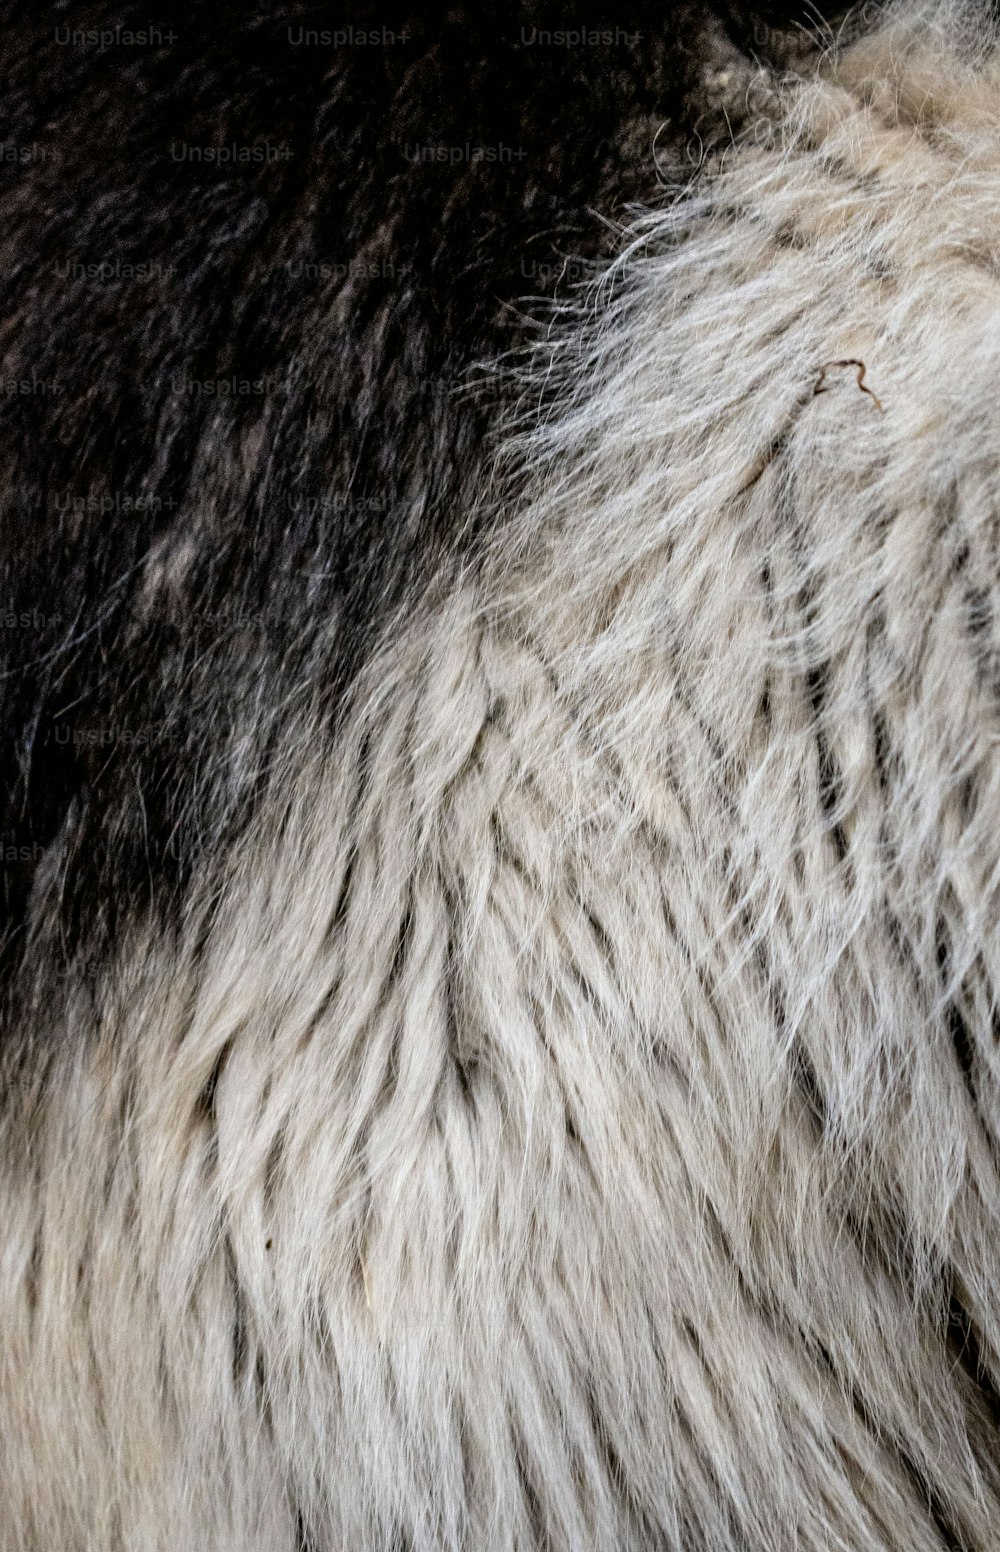 a close up of a black and white animal's fur